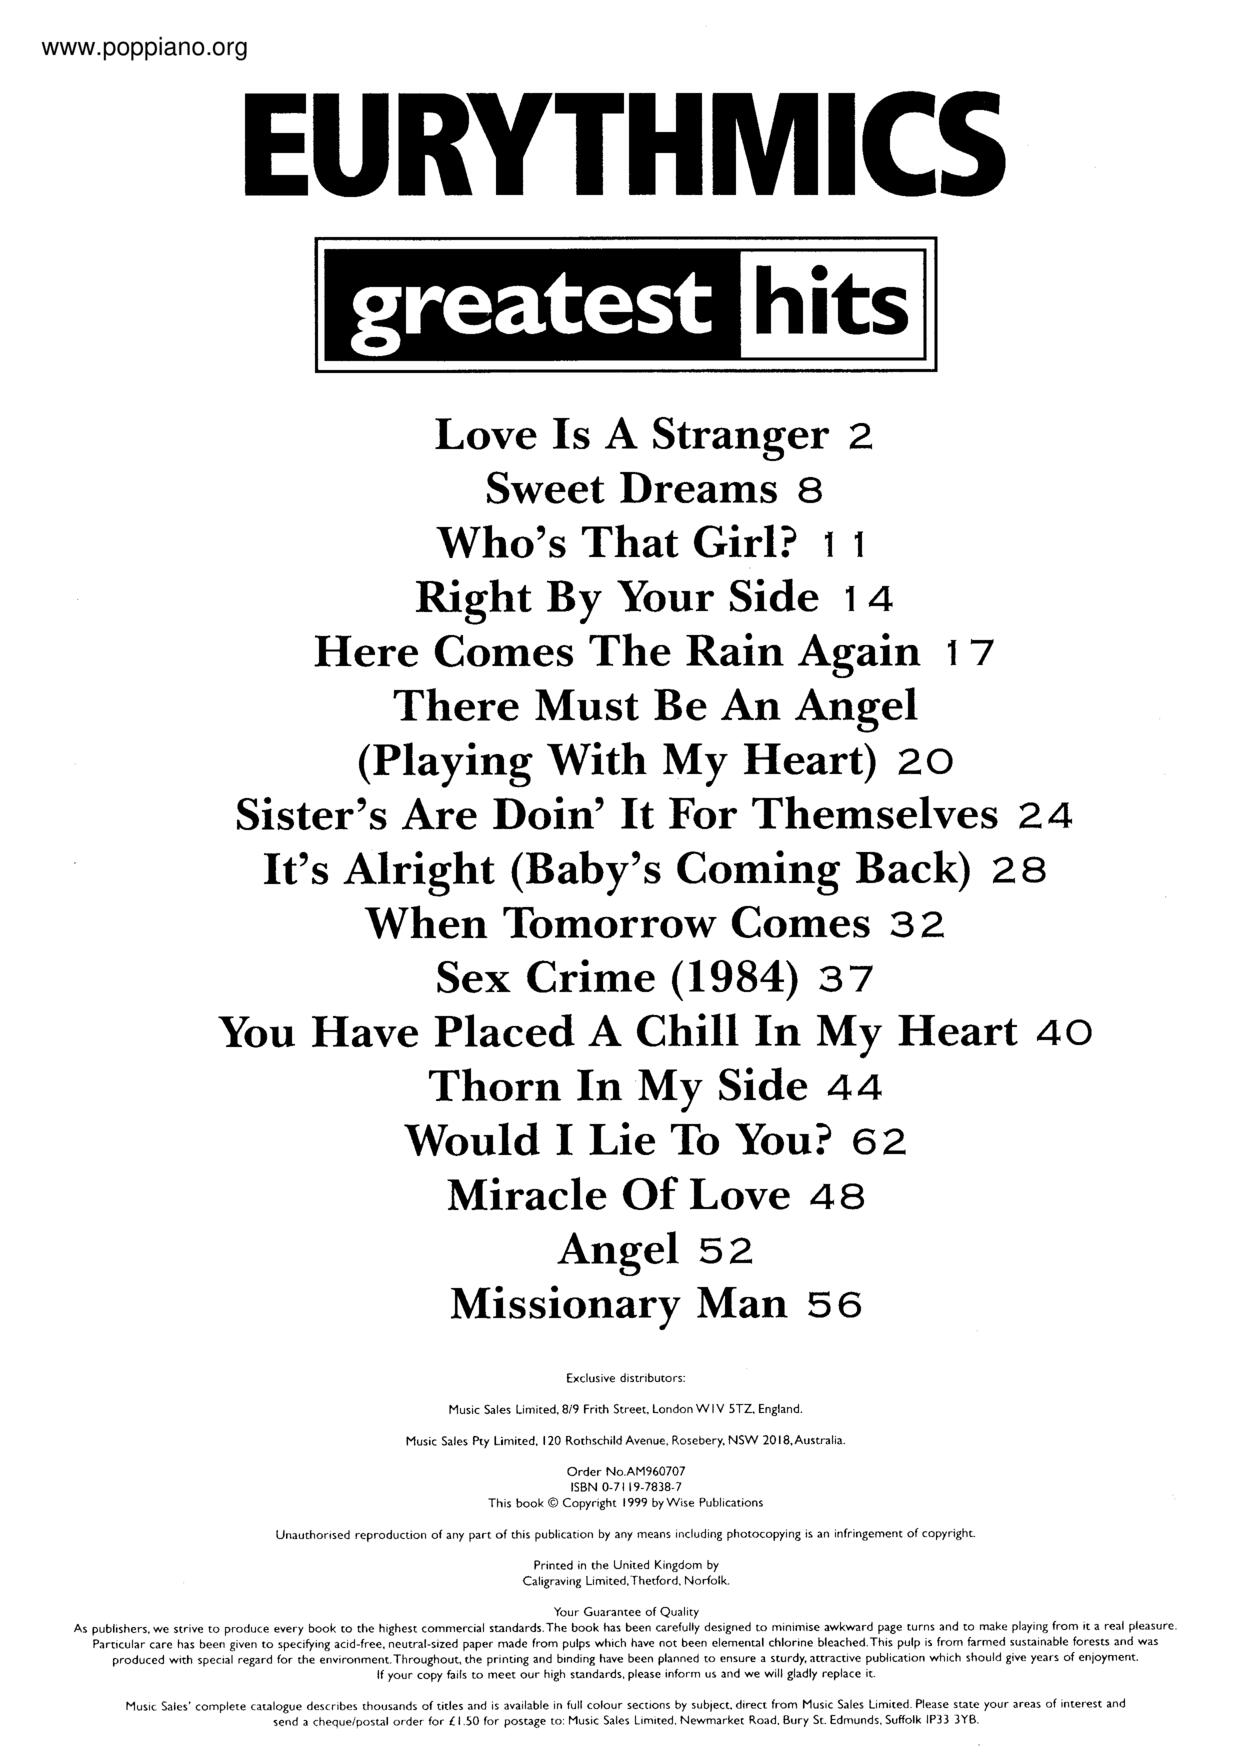 Eurythmics Greatest Hits 64 Pages Score